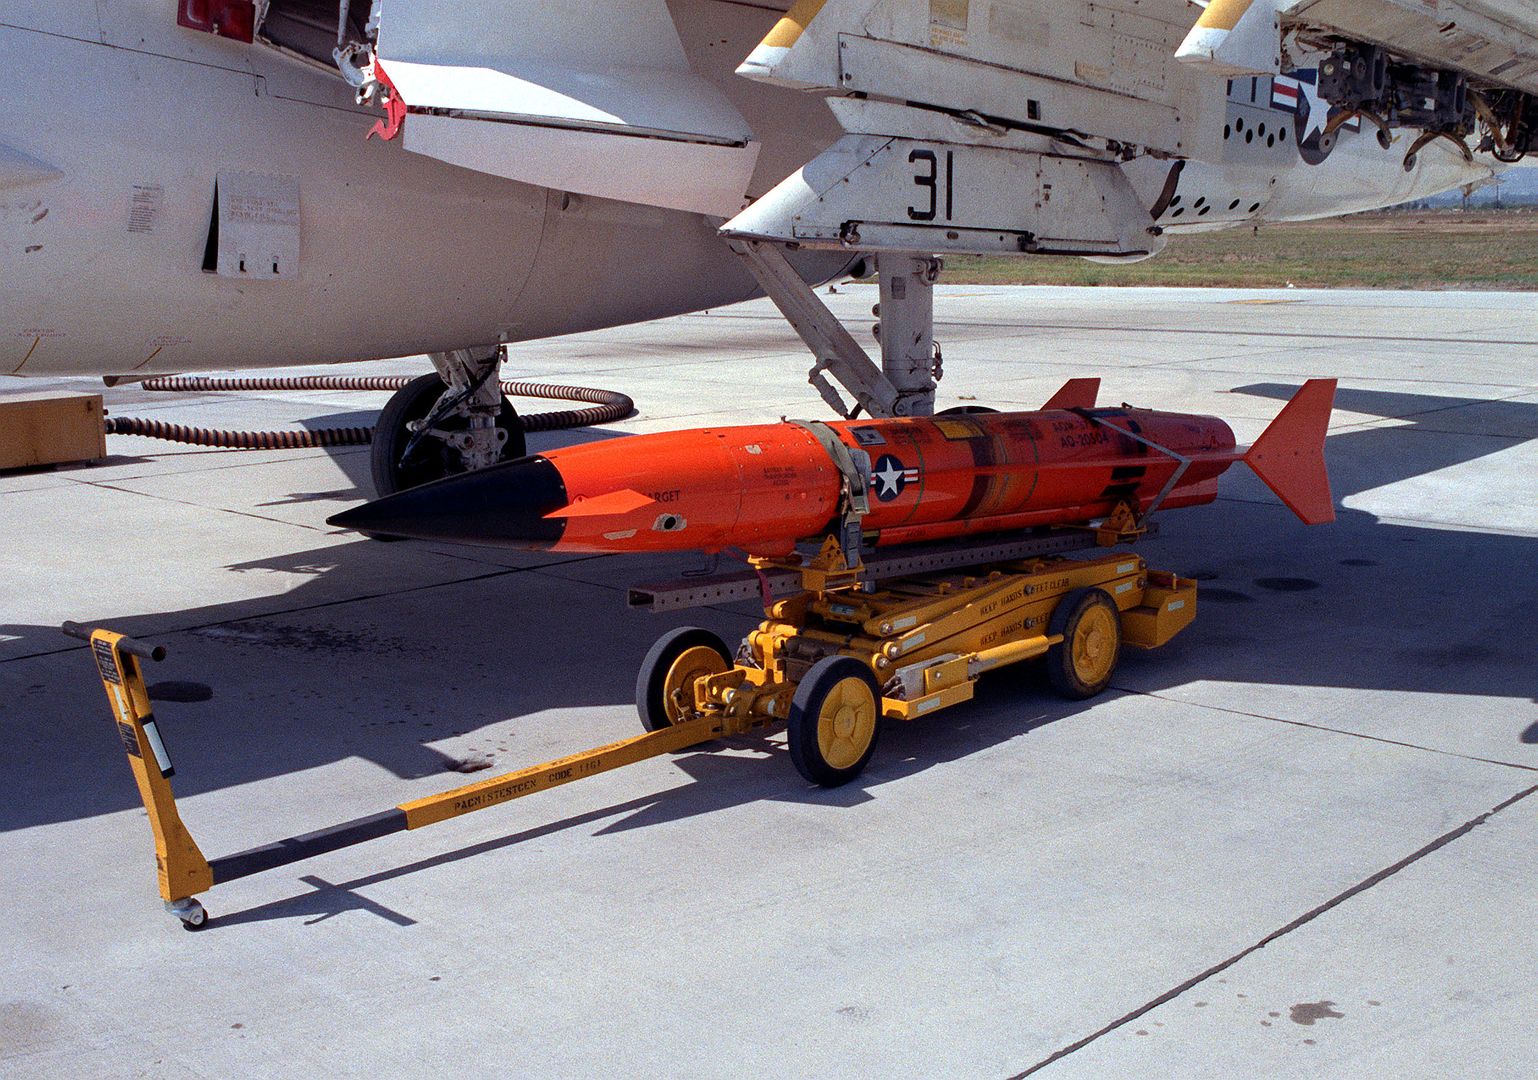 A View Of An AQM 37A Target Before It Is Uploaded Onto The Wing Of An A 6E Intruder Aircraft At The Pacific Missile Test Center Range